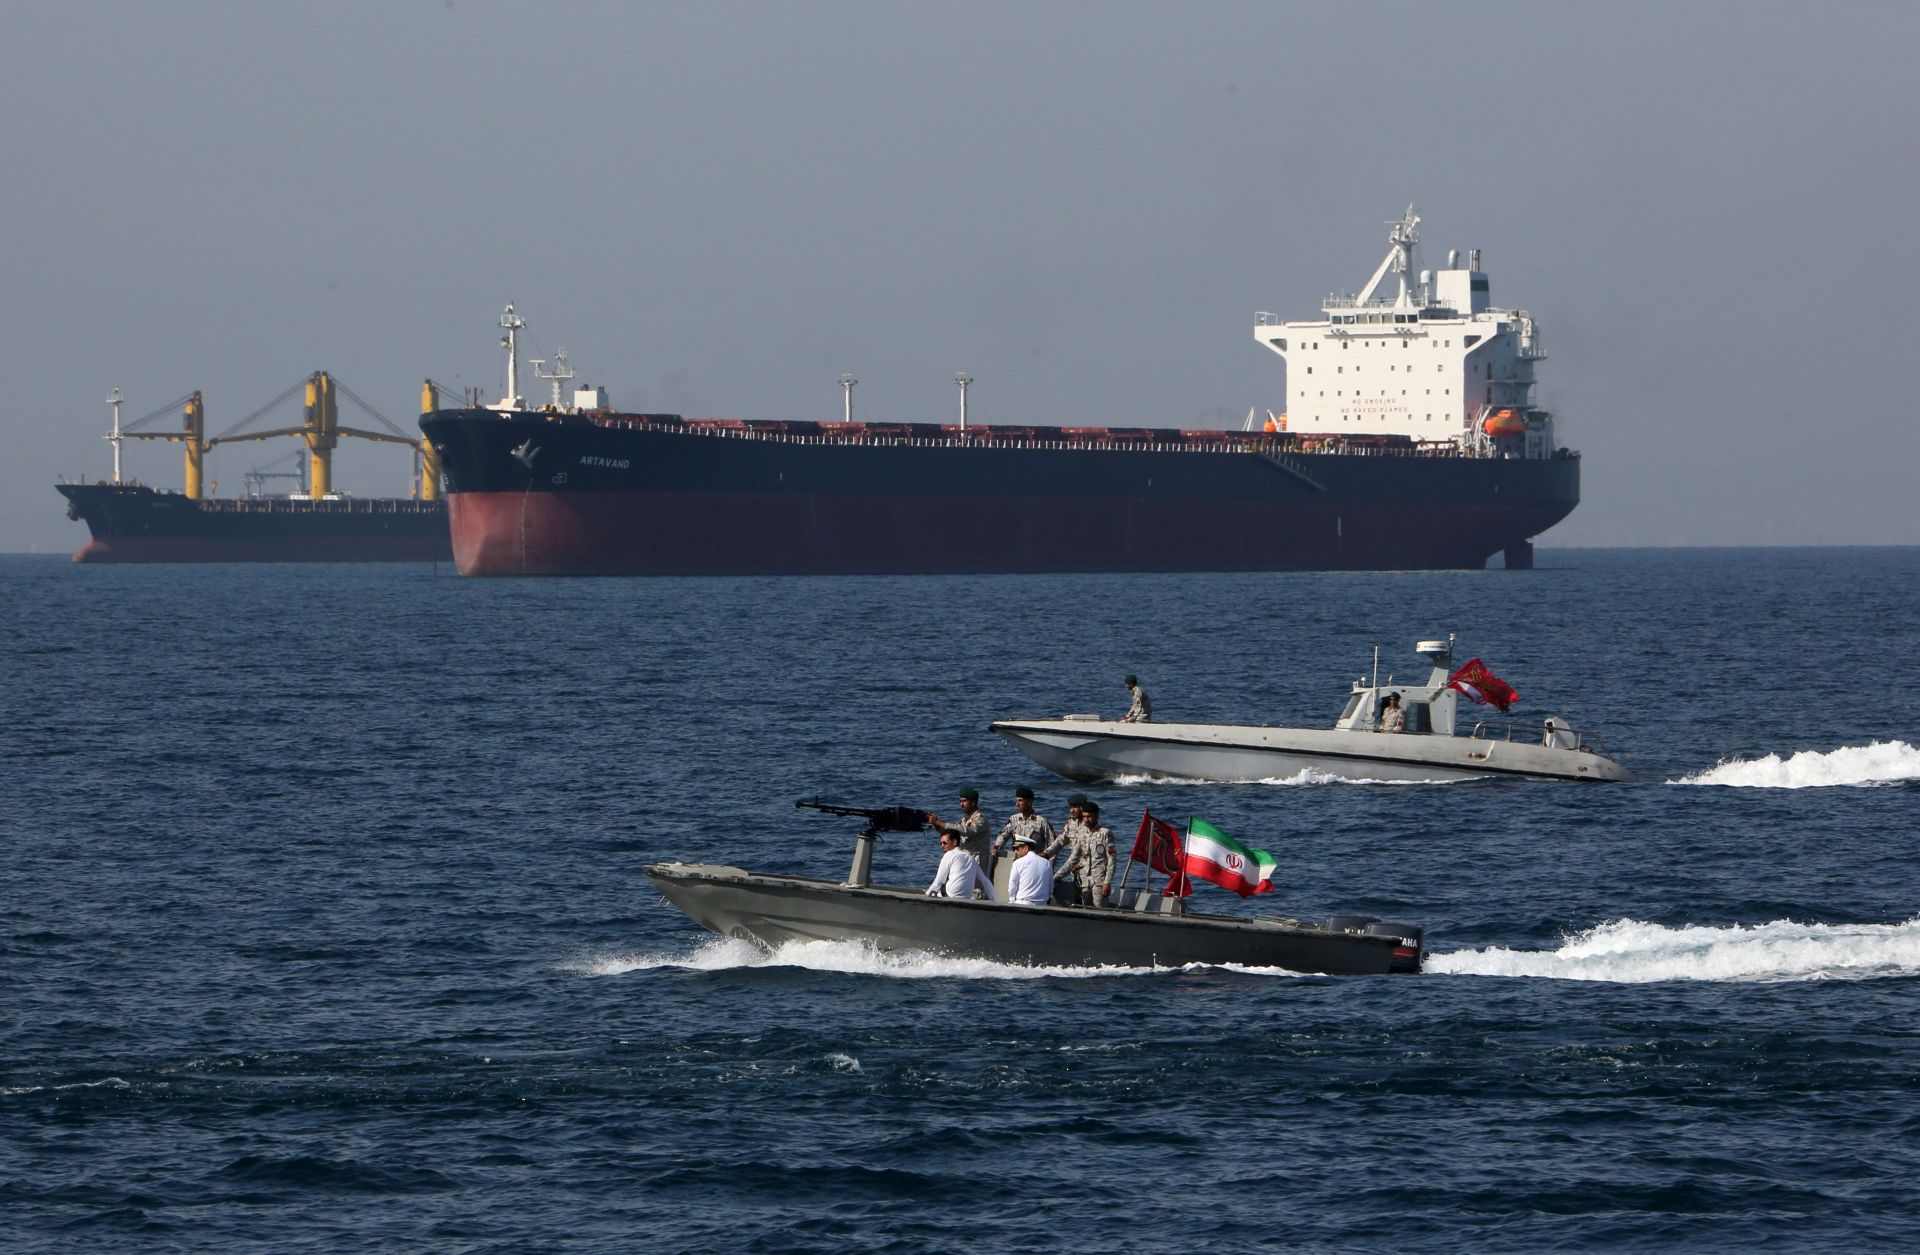 An armed Iranian speedboat in the Strait of Hormuz on April 30, 2019.